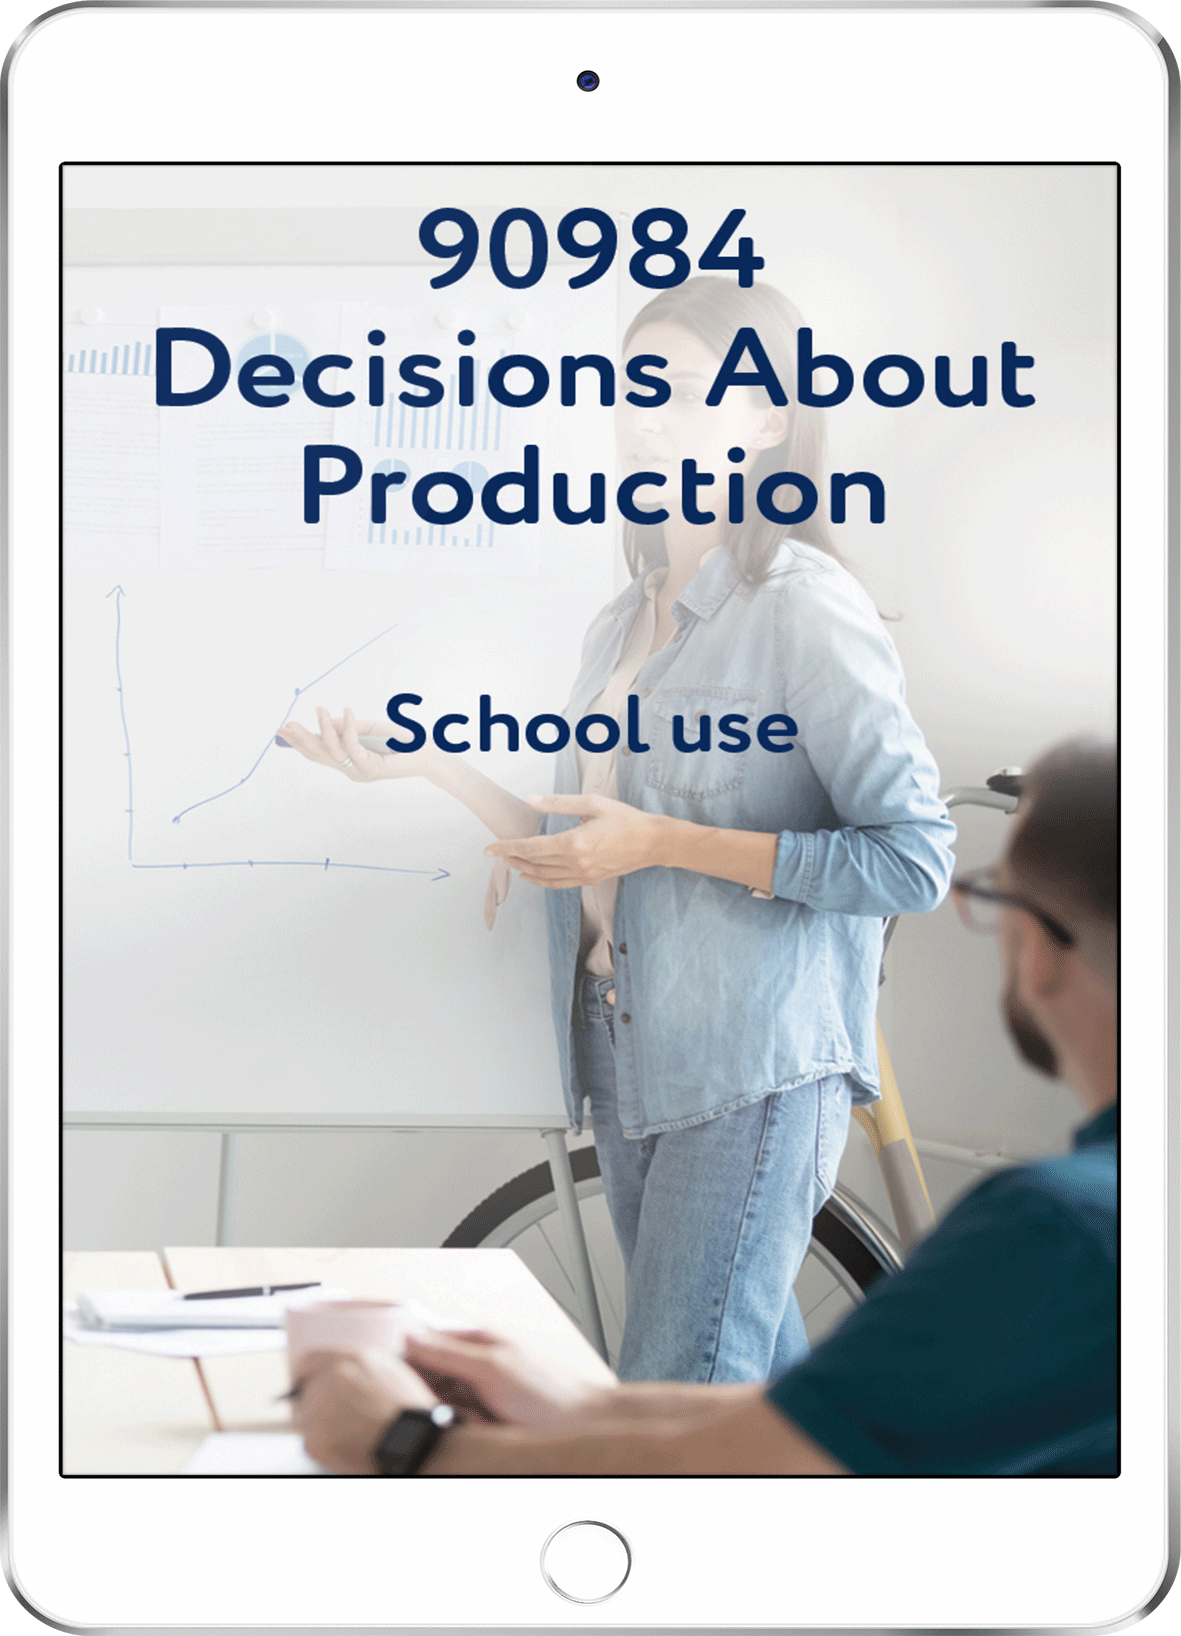 90984 Decisions About Production - School Use